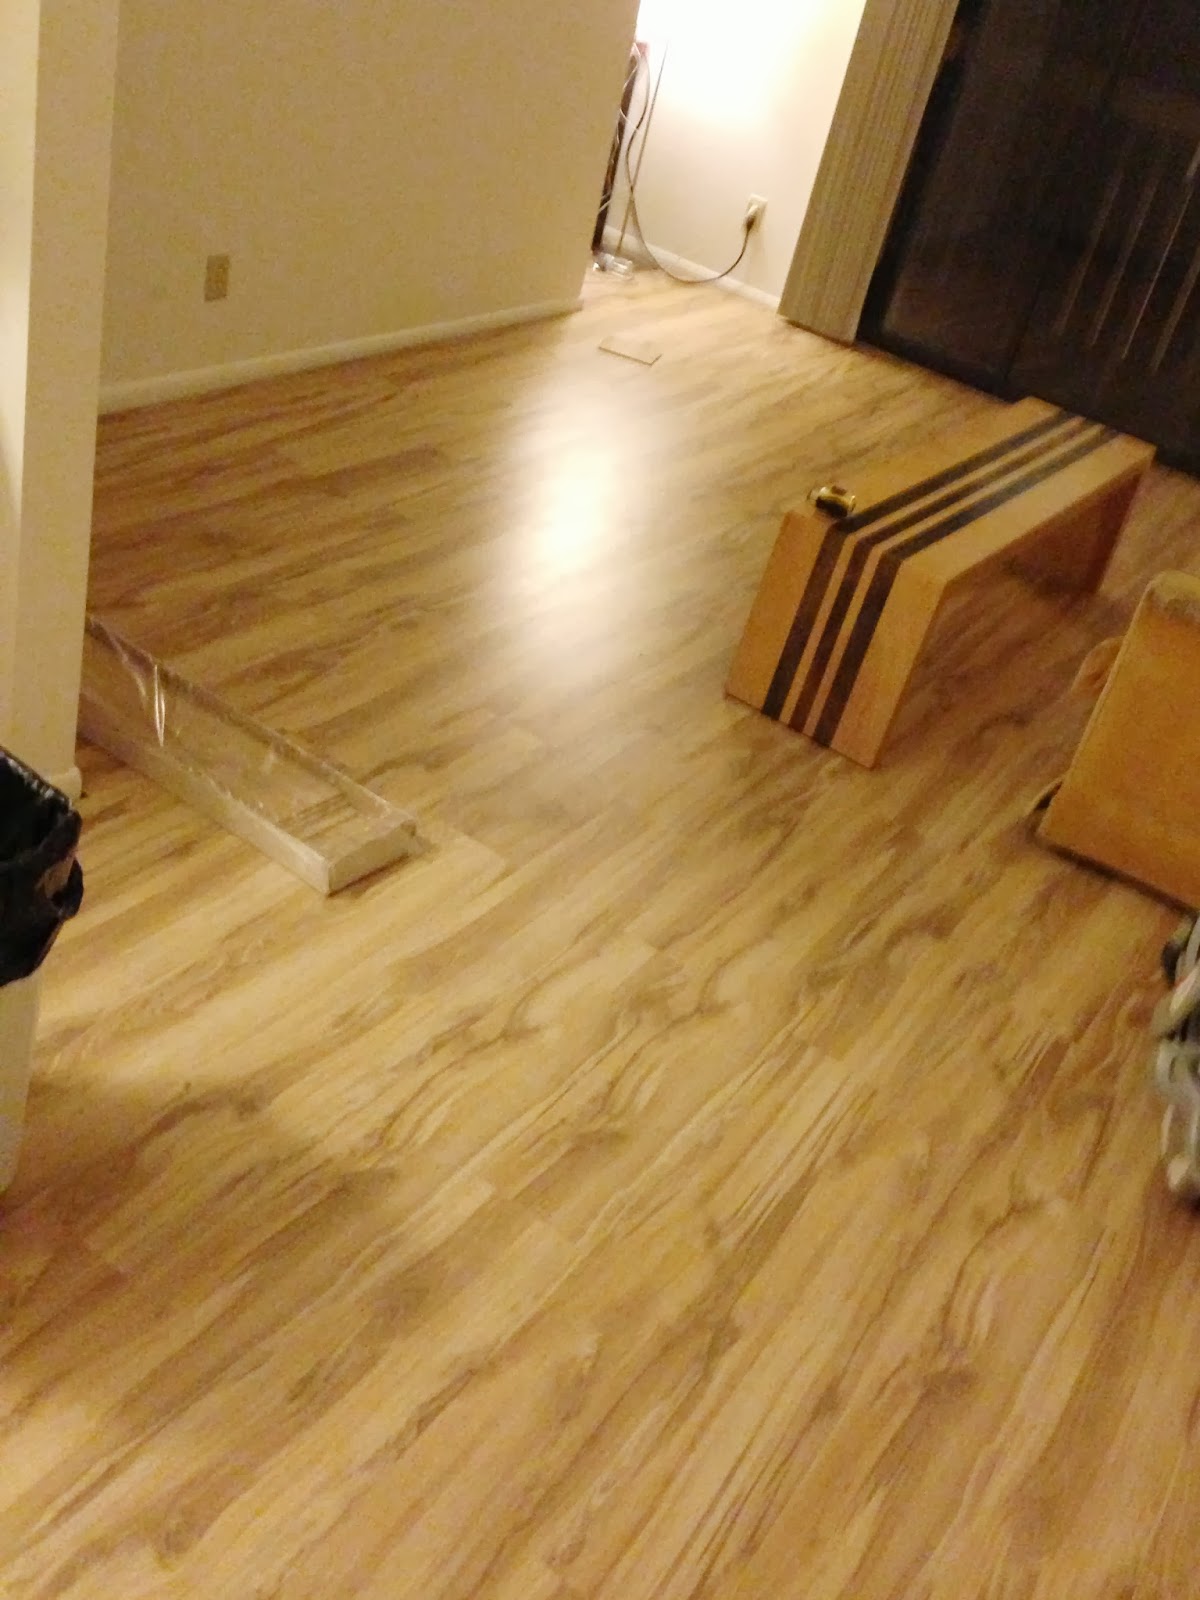 How We Put Hardwood Over Carpet Messymom, Can You Put Laminate Flooring On Top Of Carpet